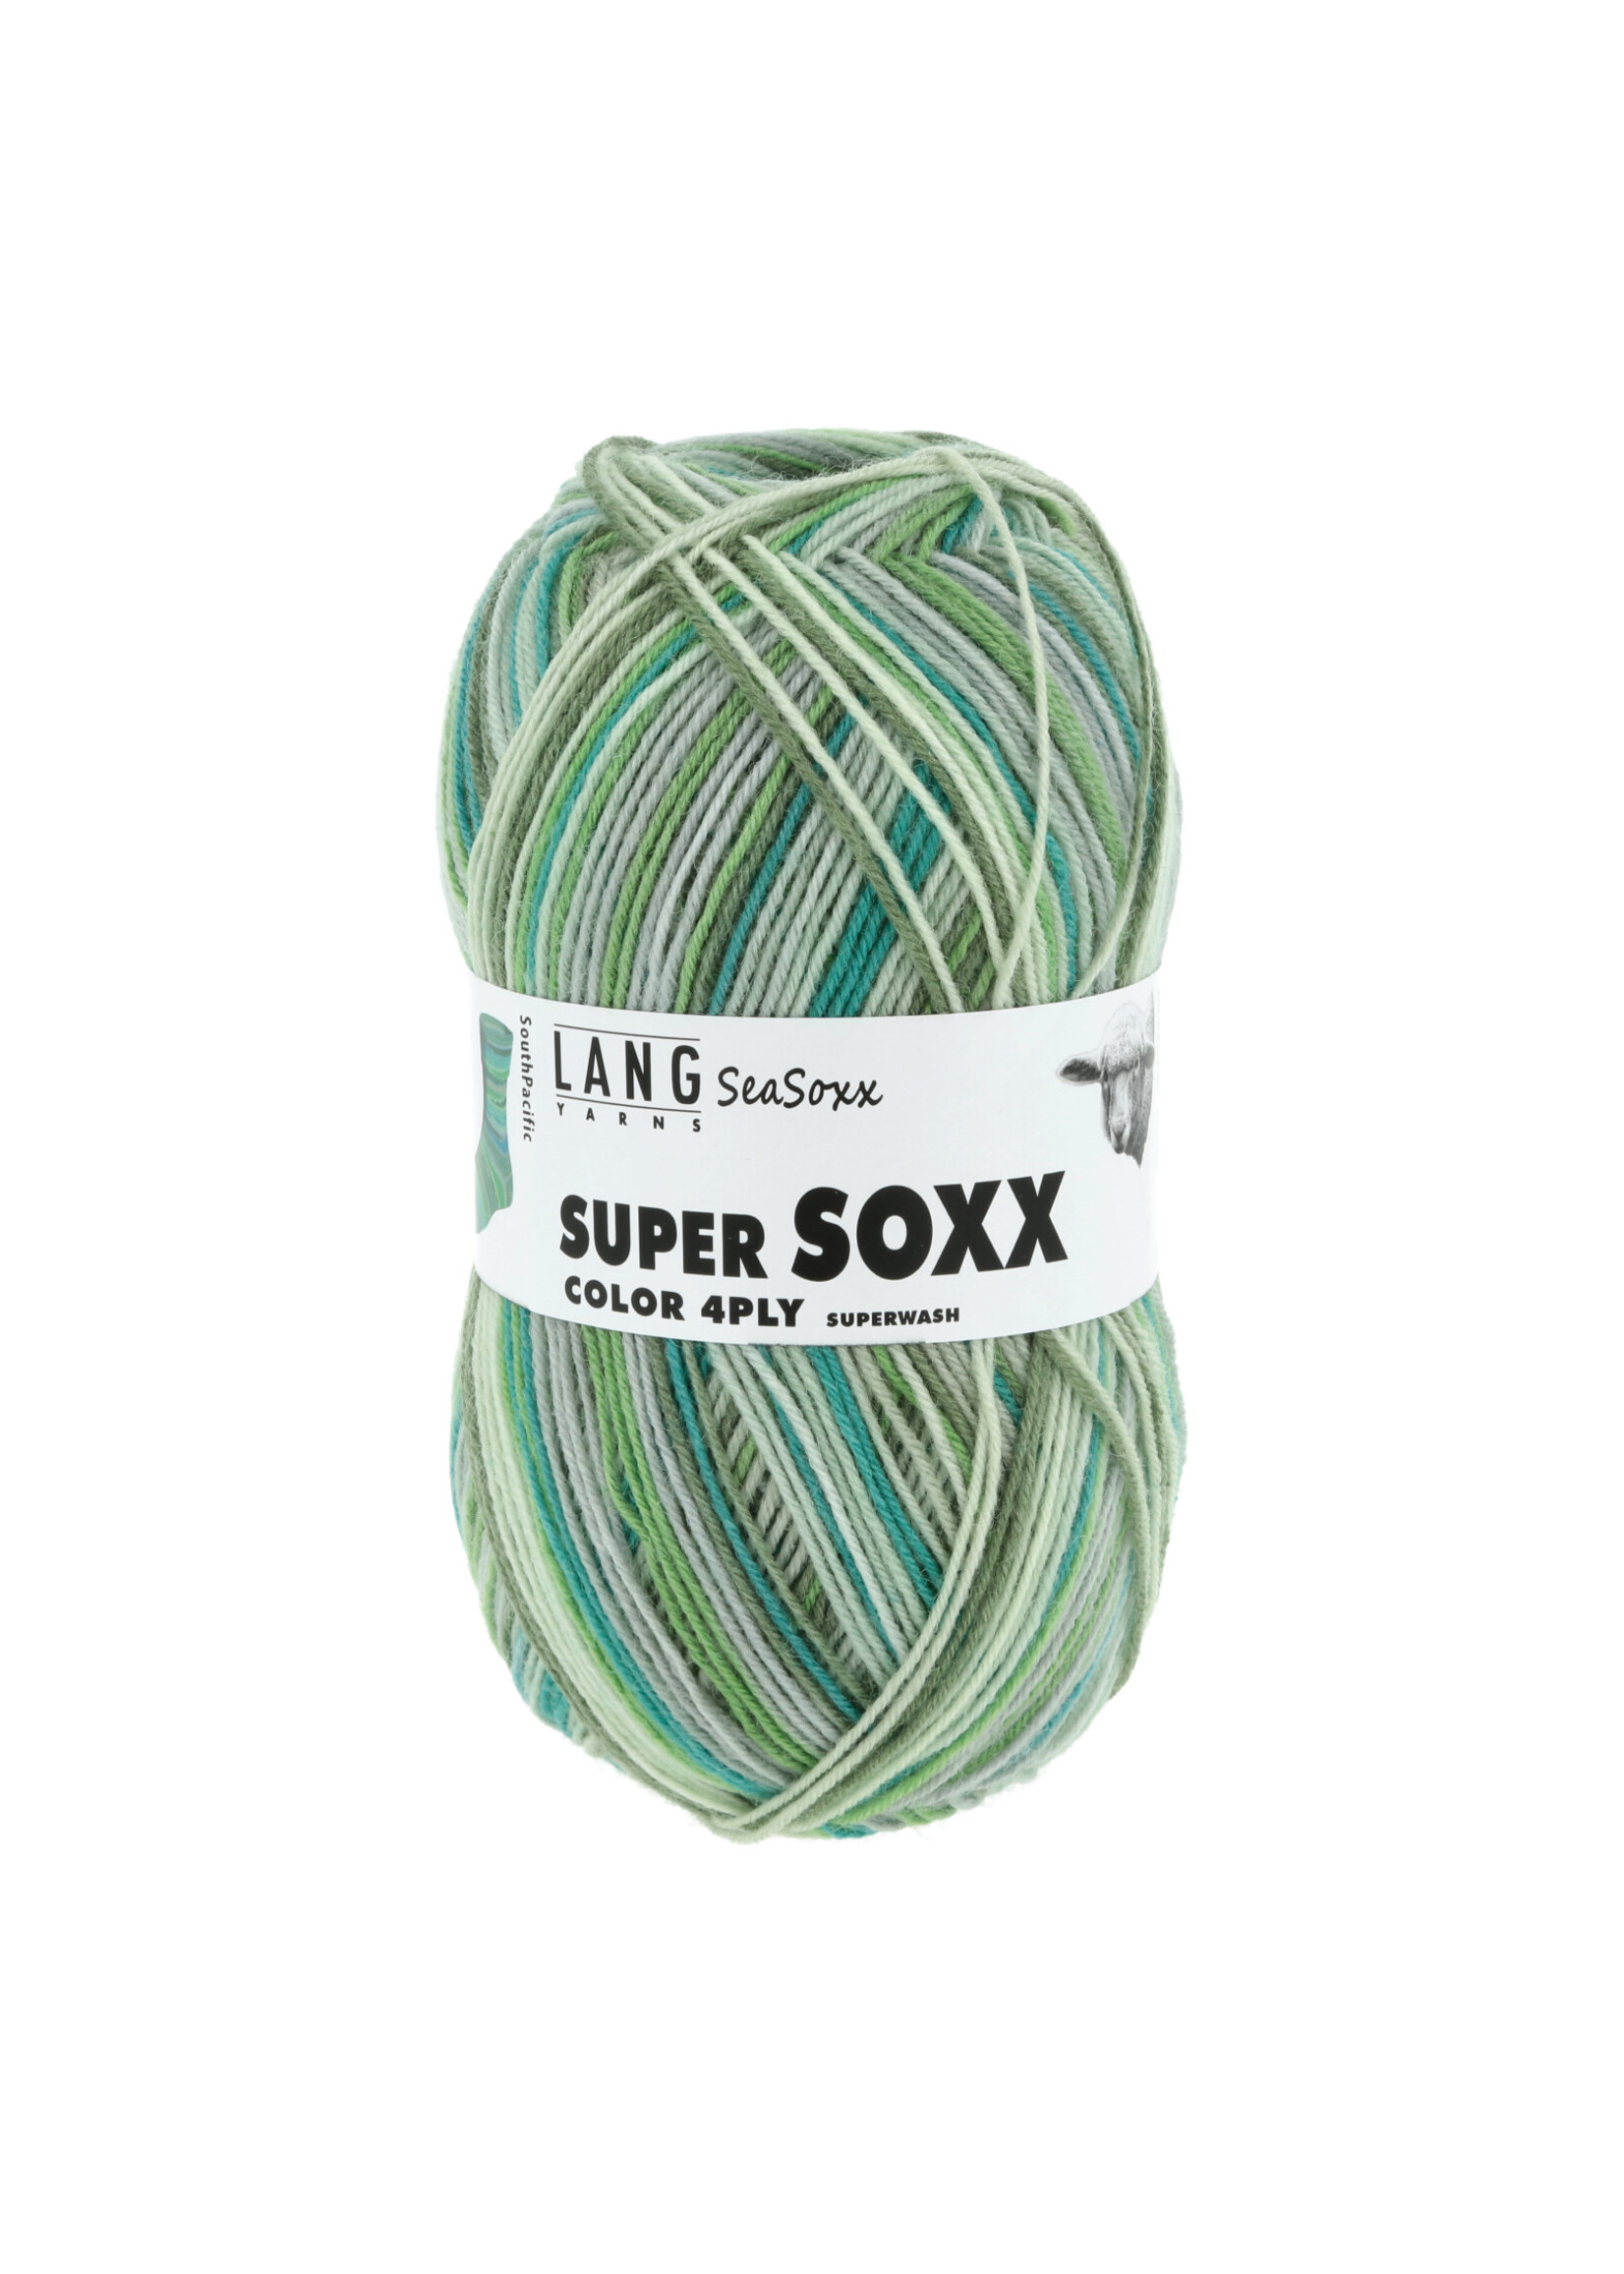 LangYarns Super Soxx Color 4-ply - 0413 SeaSoxx South Pacific